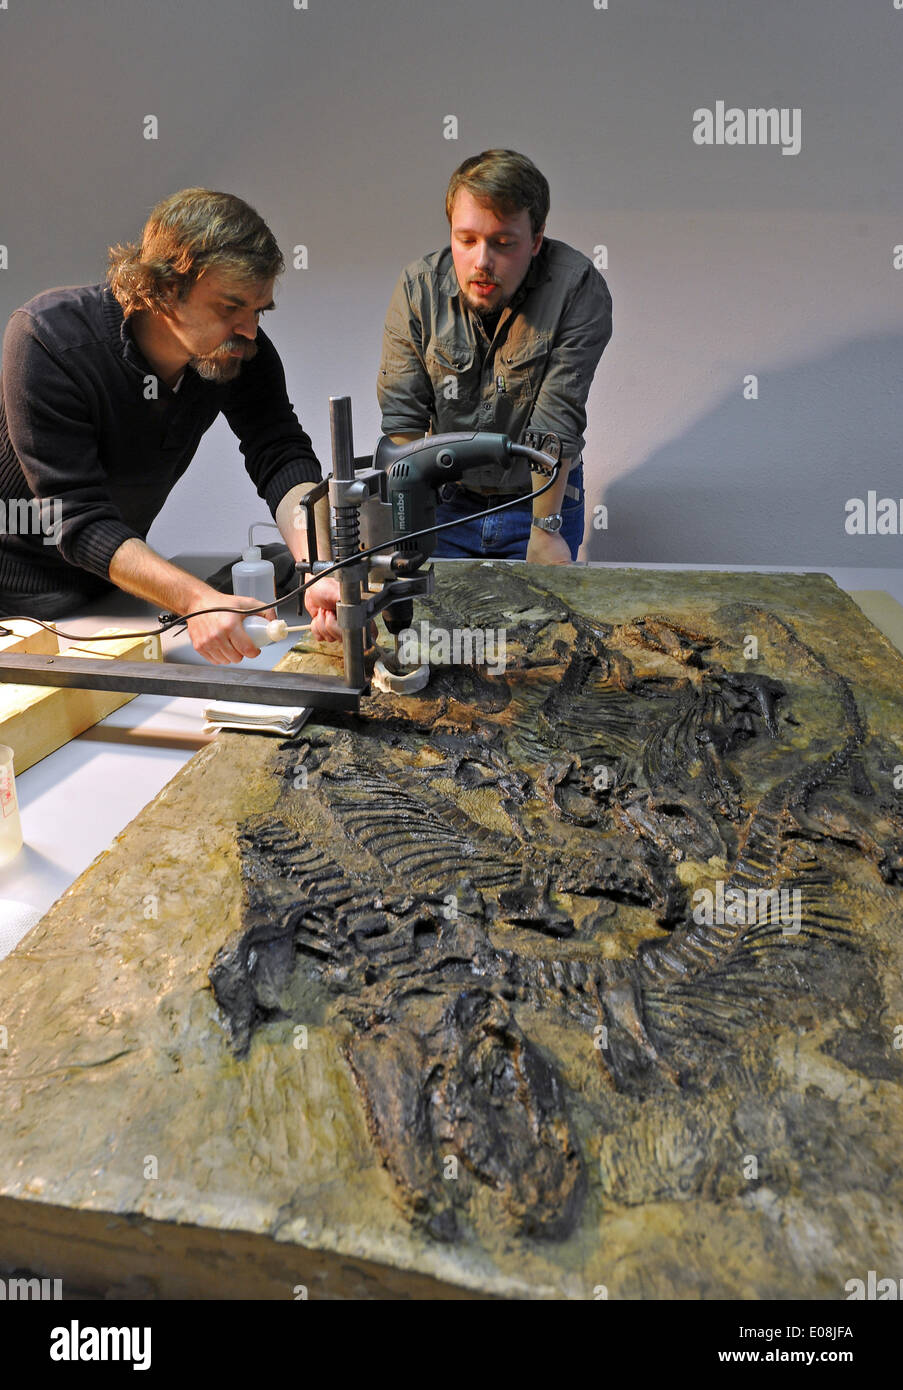 Freiberg, Germany. 06th May, 2014. Paleontologists Frederik Spindler (R) and Christen Shelton (L) take a bone sample from the world's only fossil of a Pantelosaurus, a Saxony Pelycosaurus from the Permian age, in Freiberg, Germany, 06 May 2014. Thin slices of bone have been taken to research its growth under the microscope. Photo: MATTHIAS HIEKEL/dpa/Alamy Live News Stock Photo